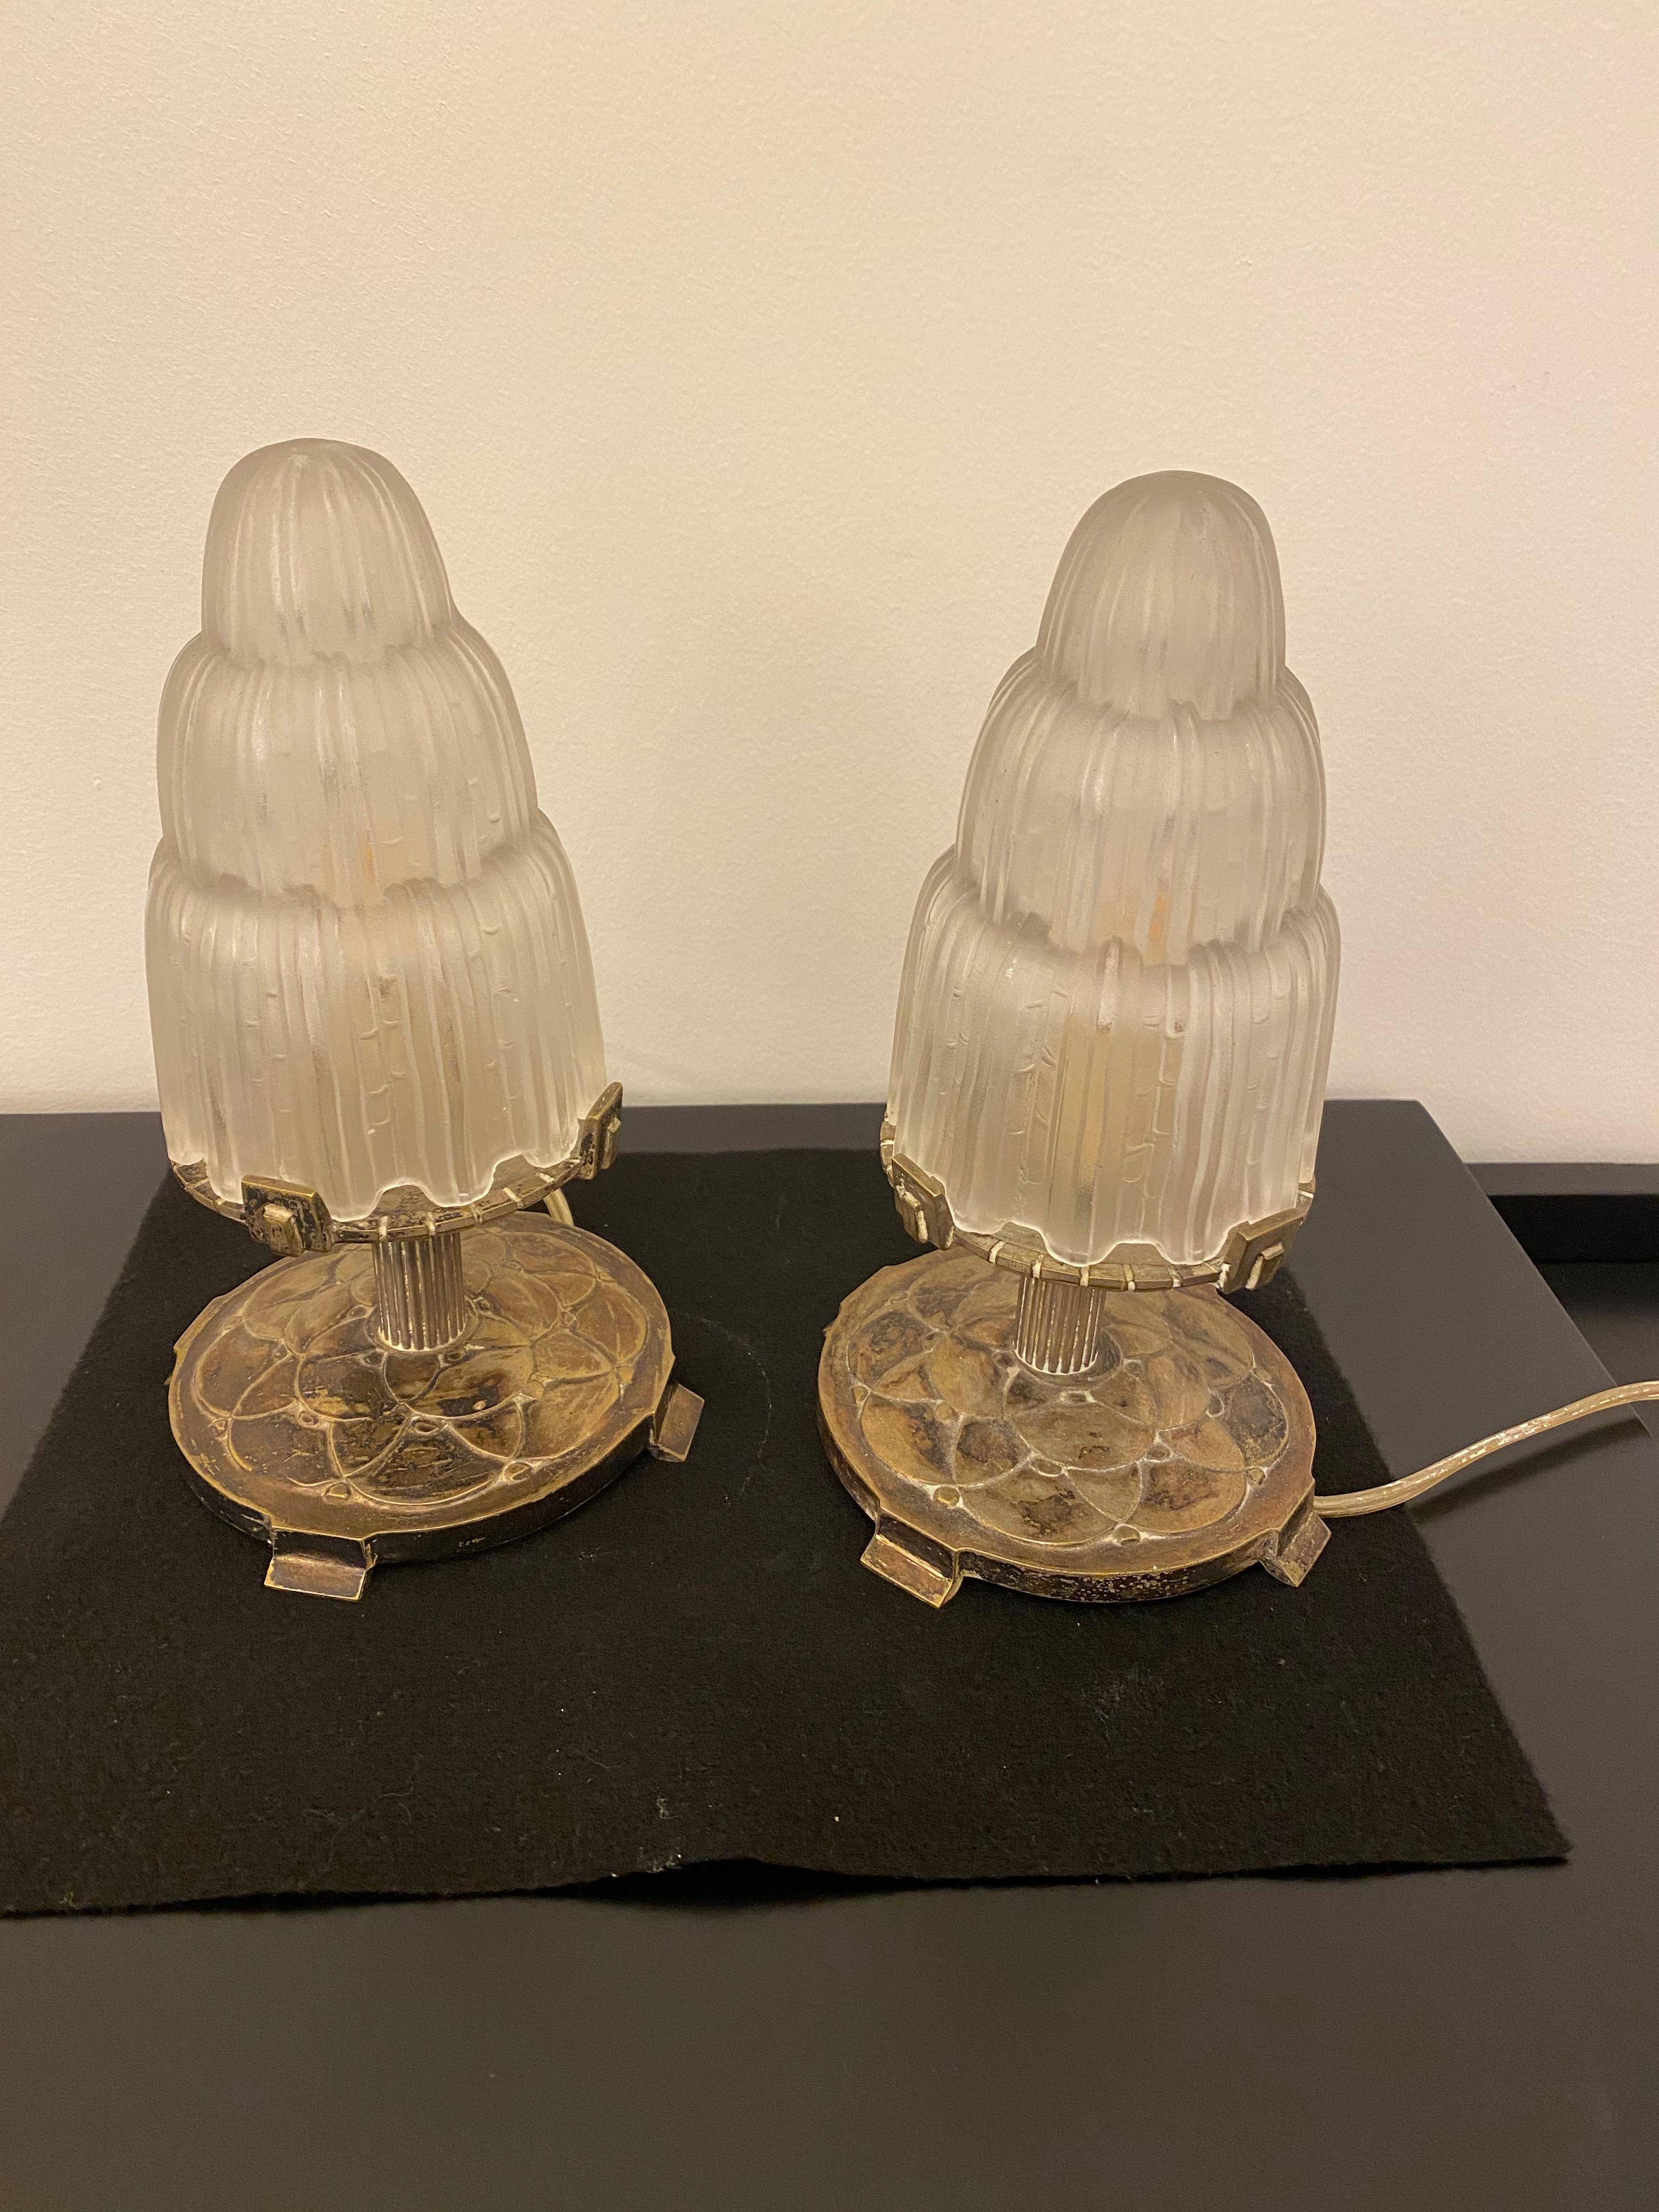 Pair of French Art Deco table lamps created by Marius Ernest Sabino, (1878-1961). The shades are clear frosted glass with polished details referred to as the 